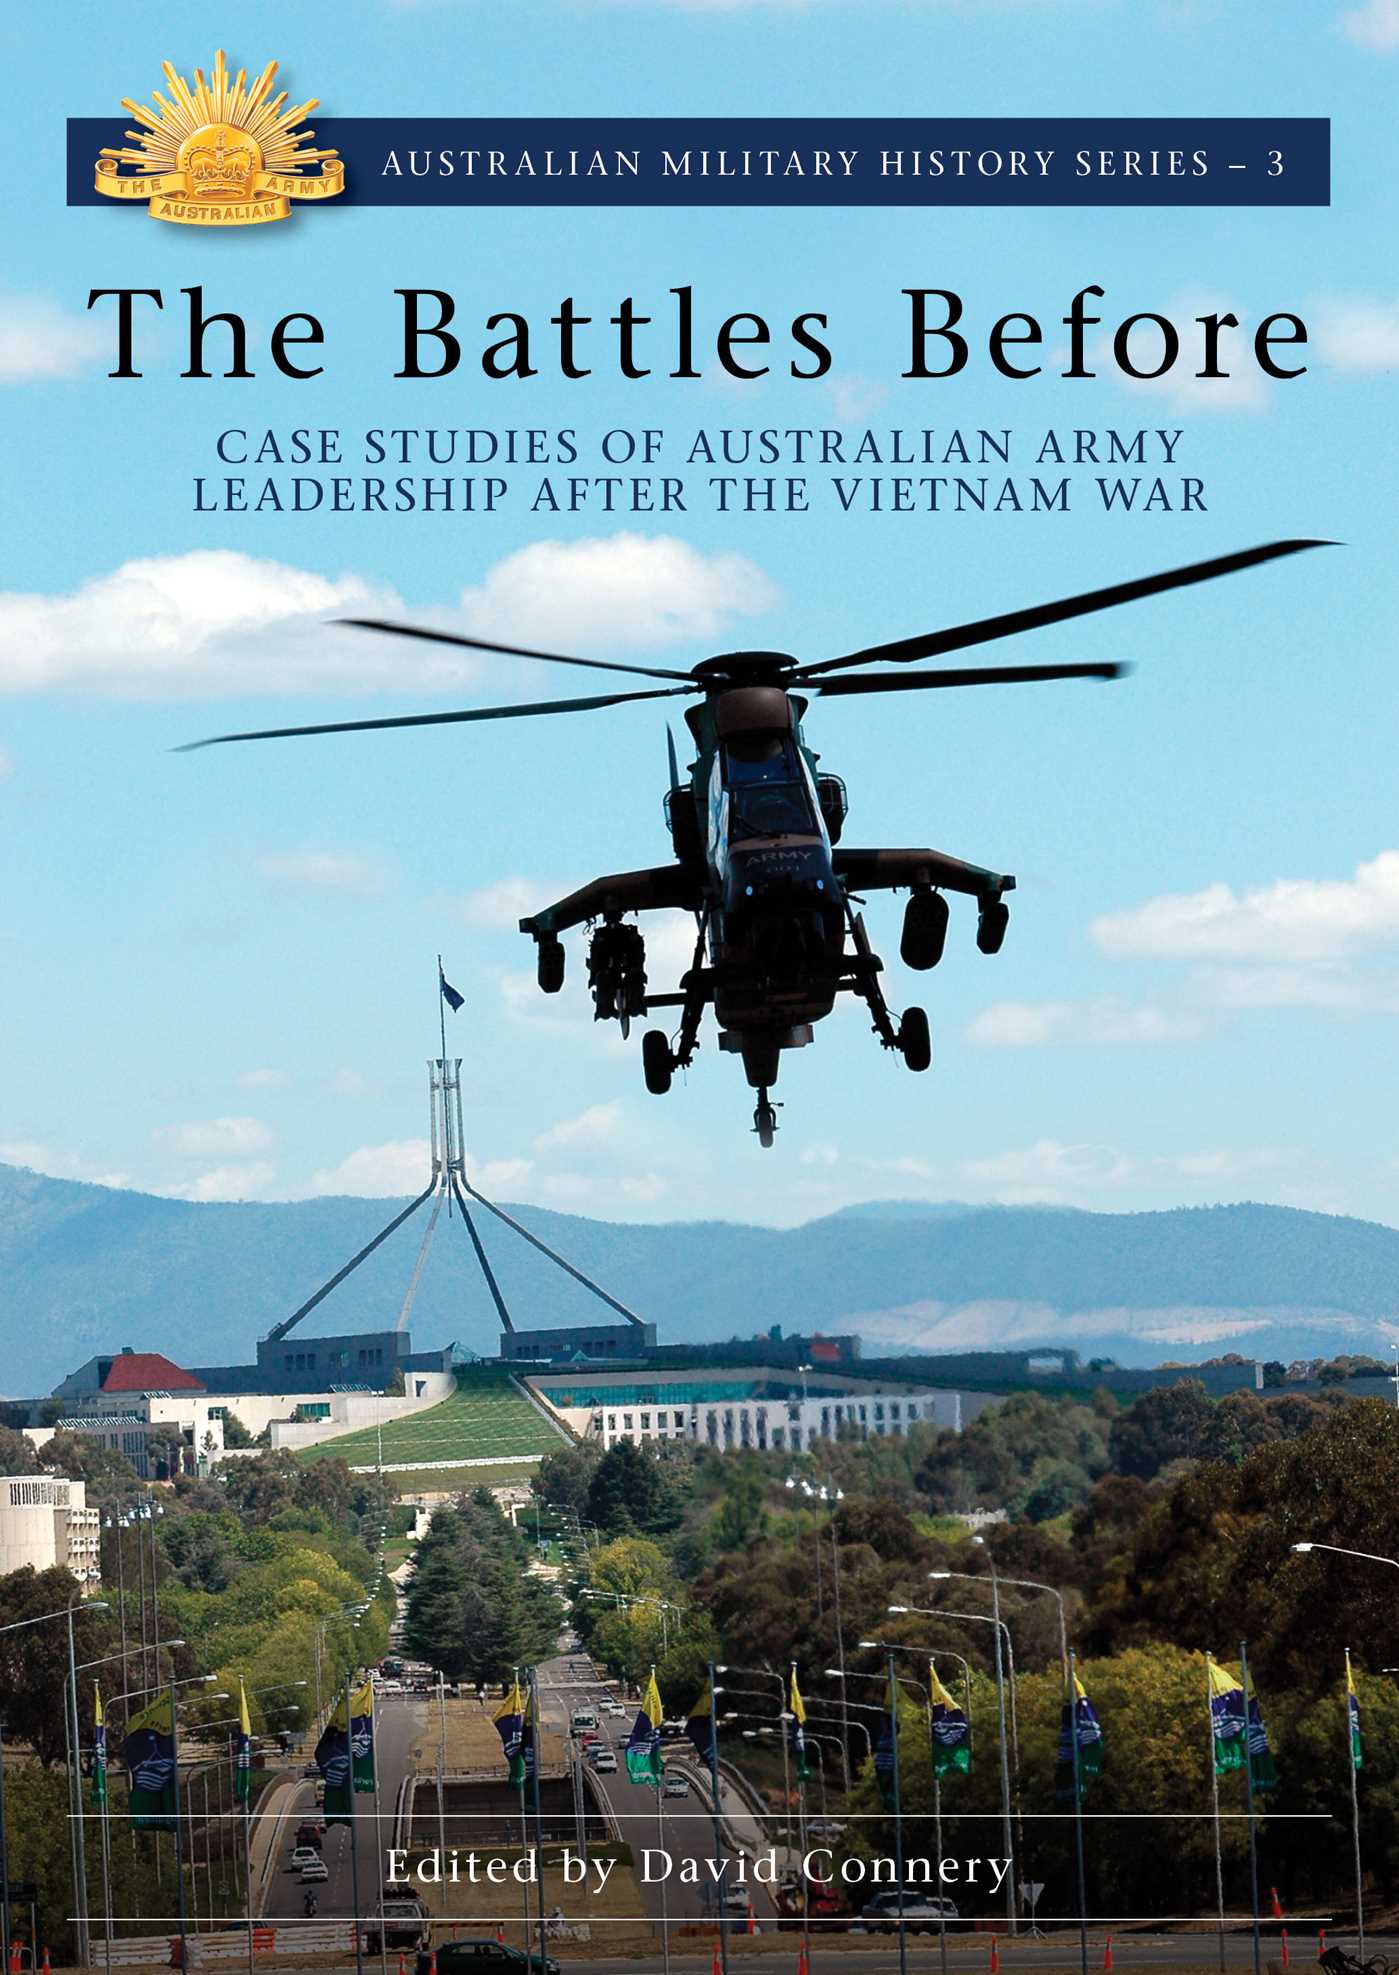 The battles before: case studies of Australian army leadership after the Vietnam War